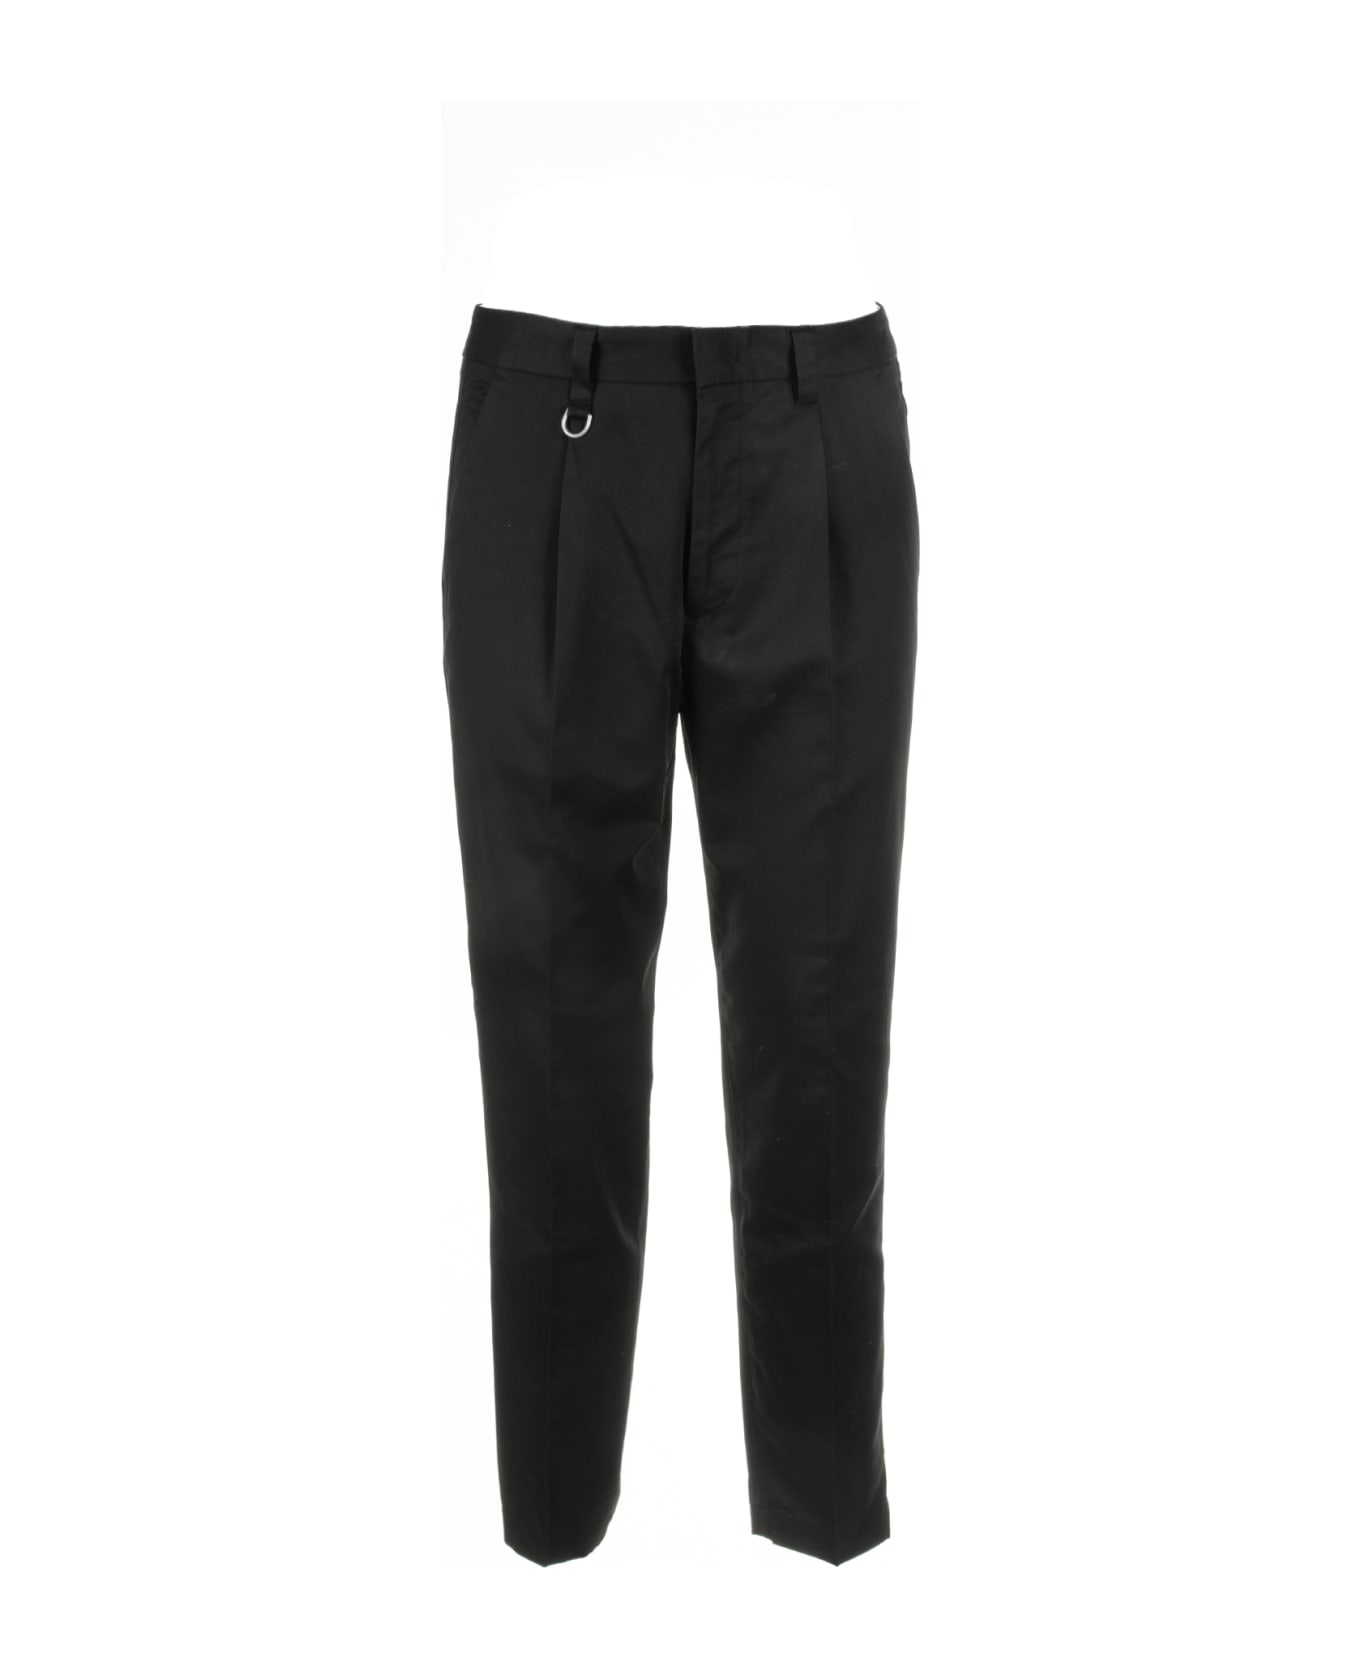 Paolo Pecora Black Trousers In Cotton And Linen Blend - NERO